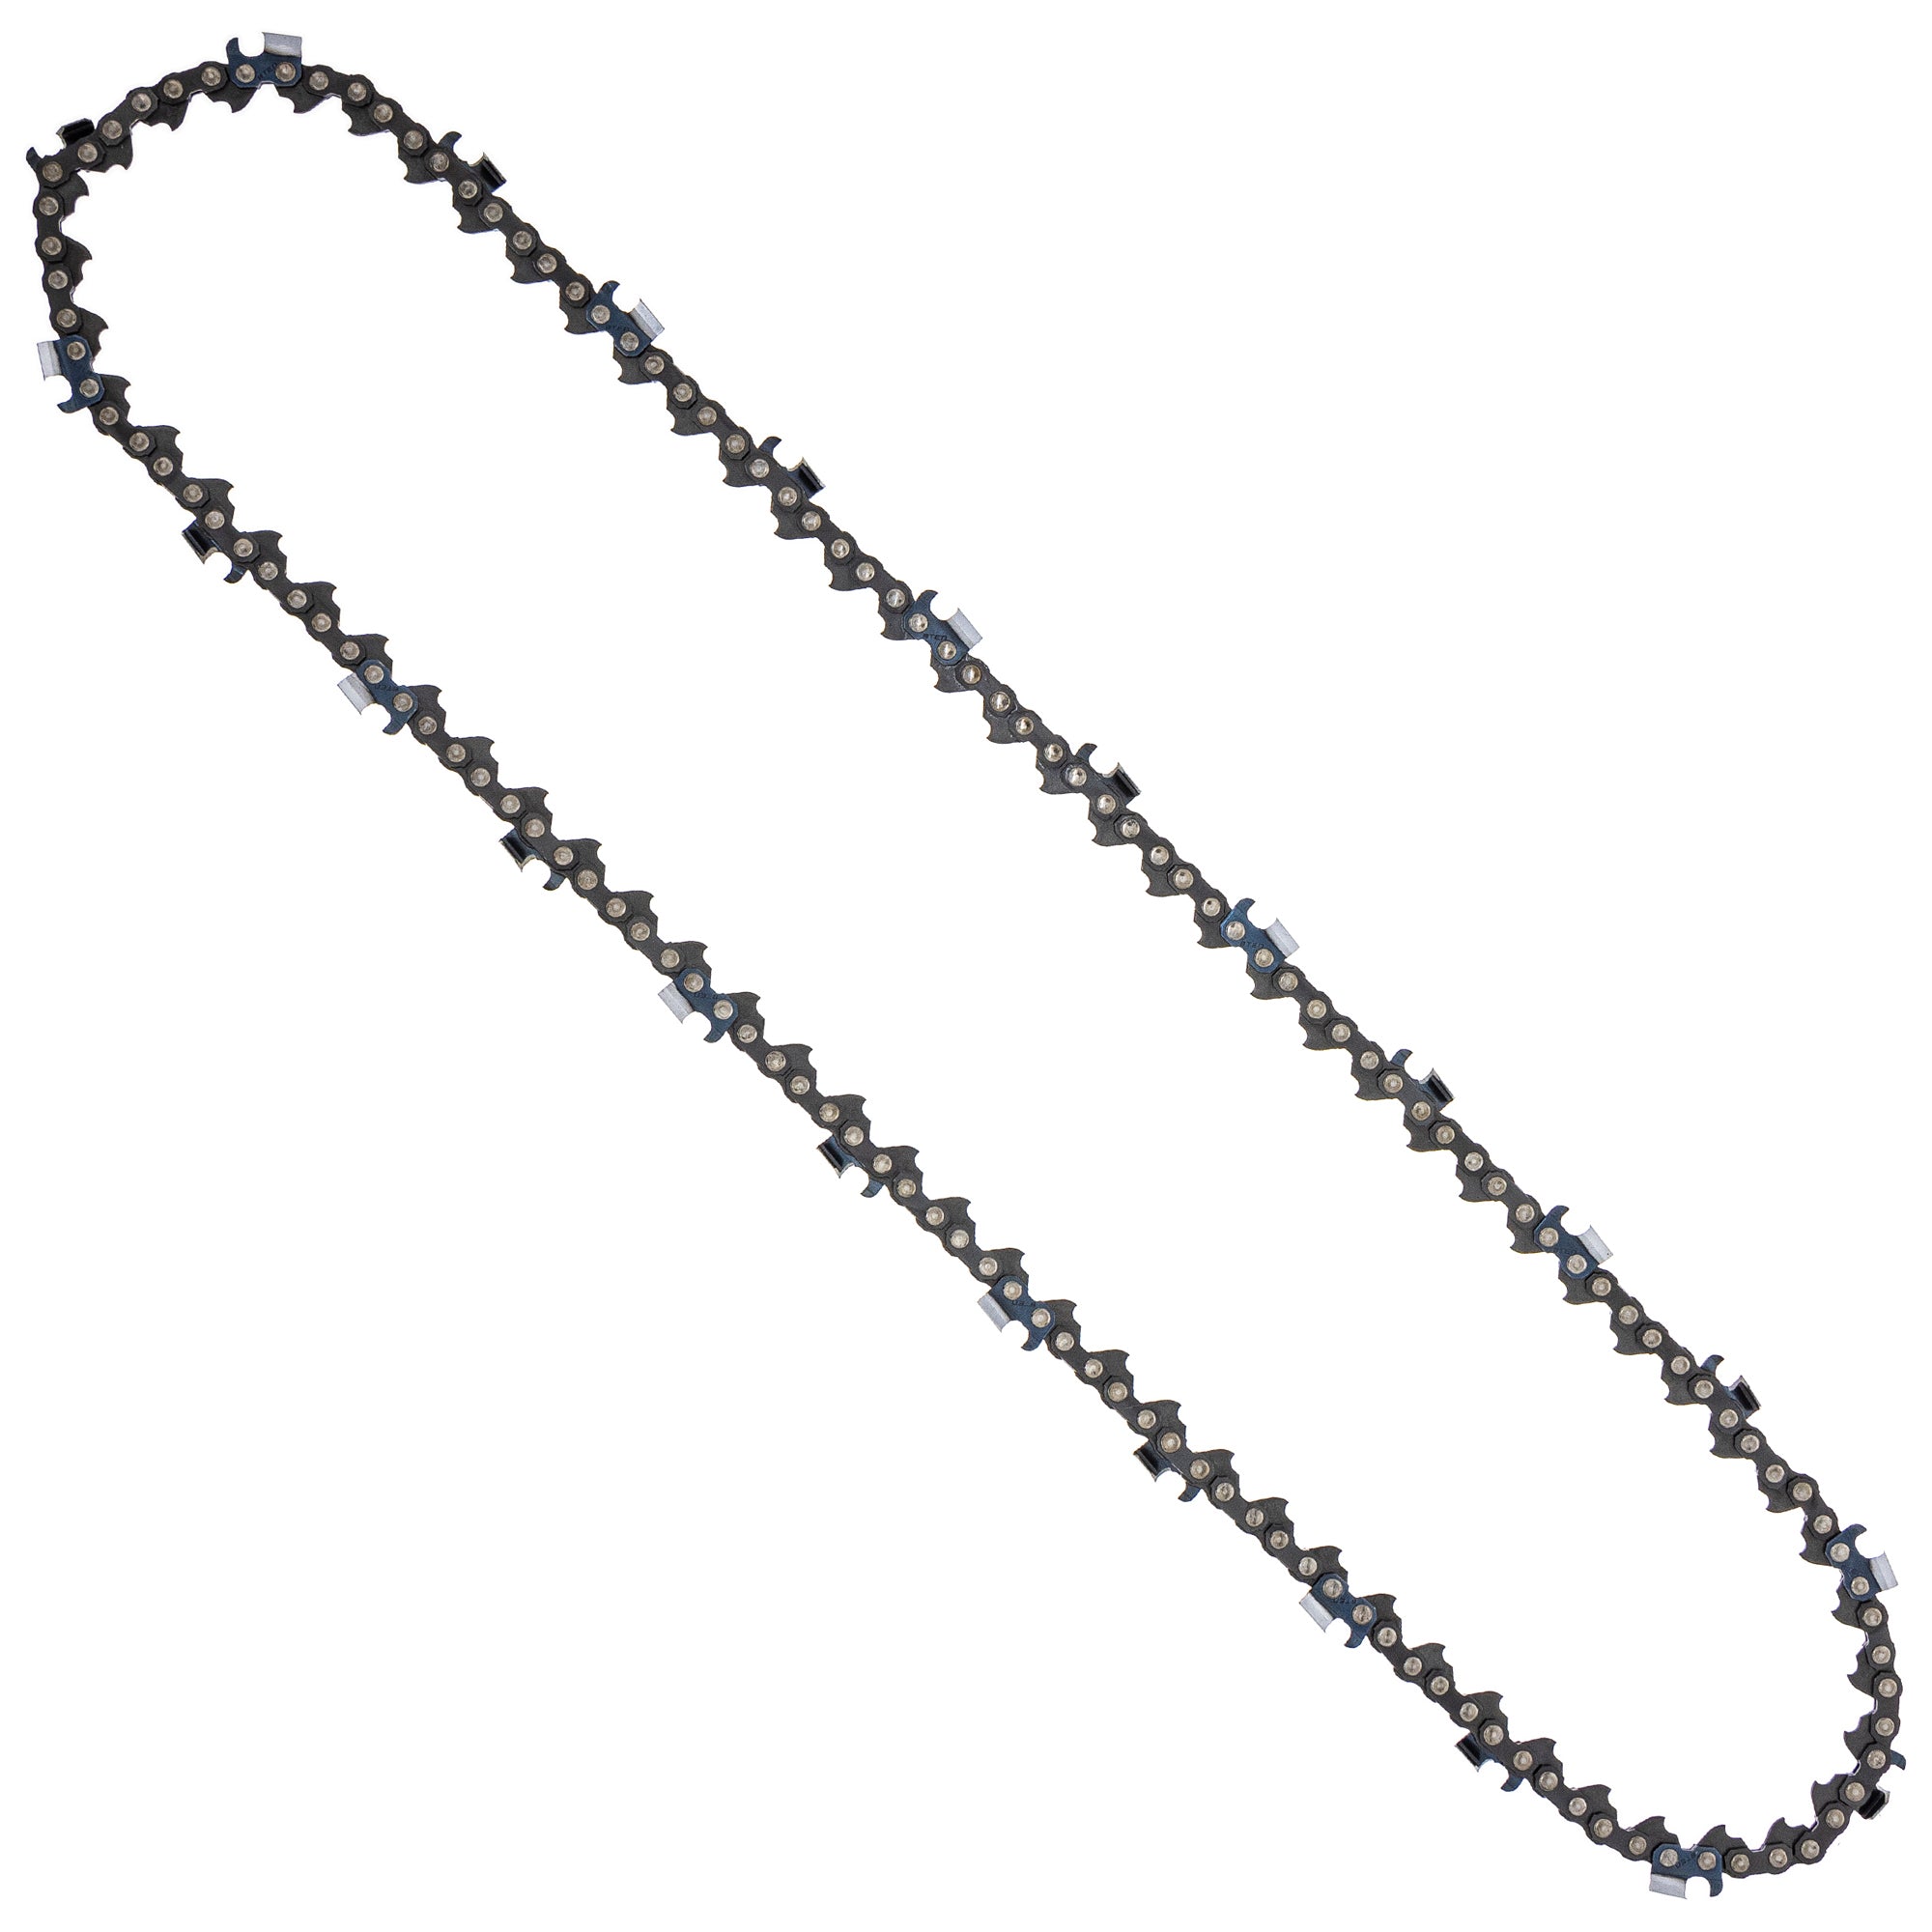 8TEN 810-CCC2290H Chain 5-Pack for zOTHER Oregon Husqvarna Poulan